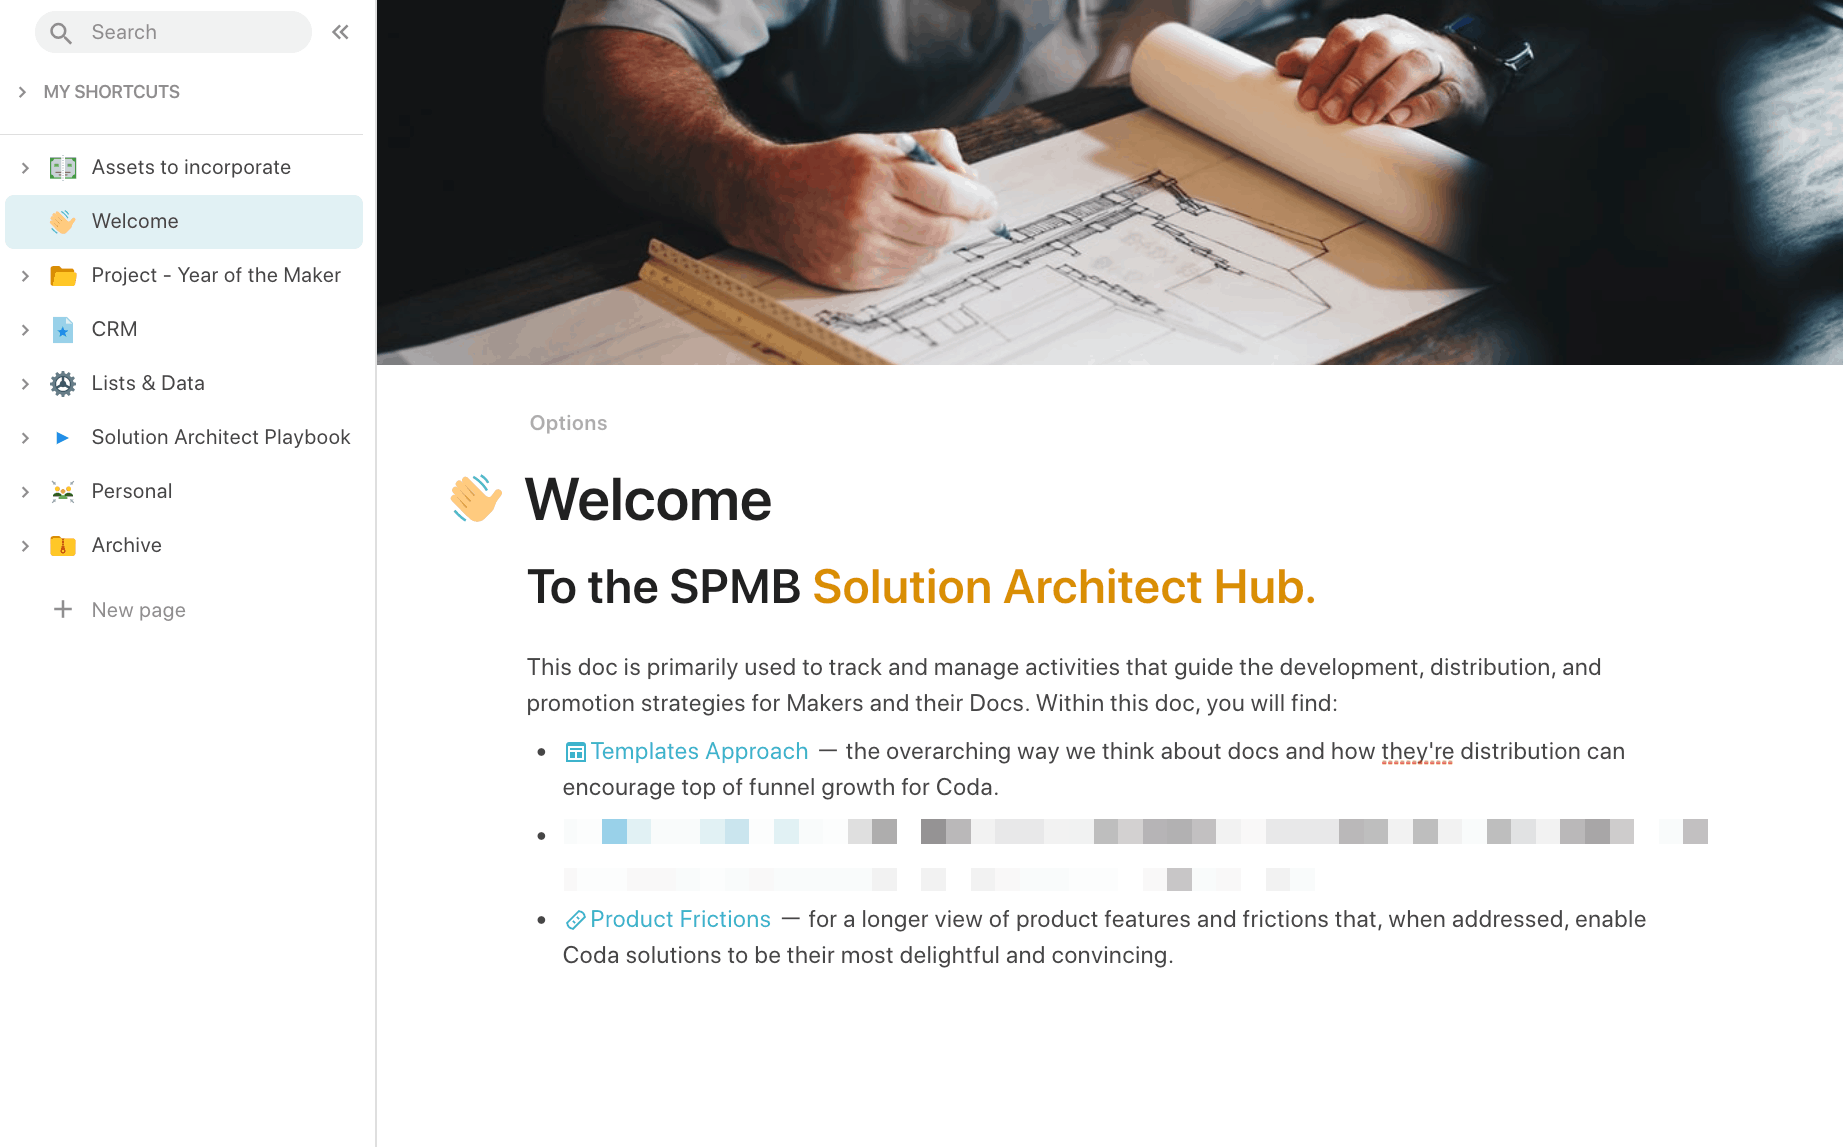 Cross functional collaboration - Welcome to the Solution Architech Hub